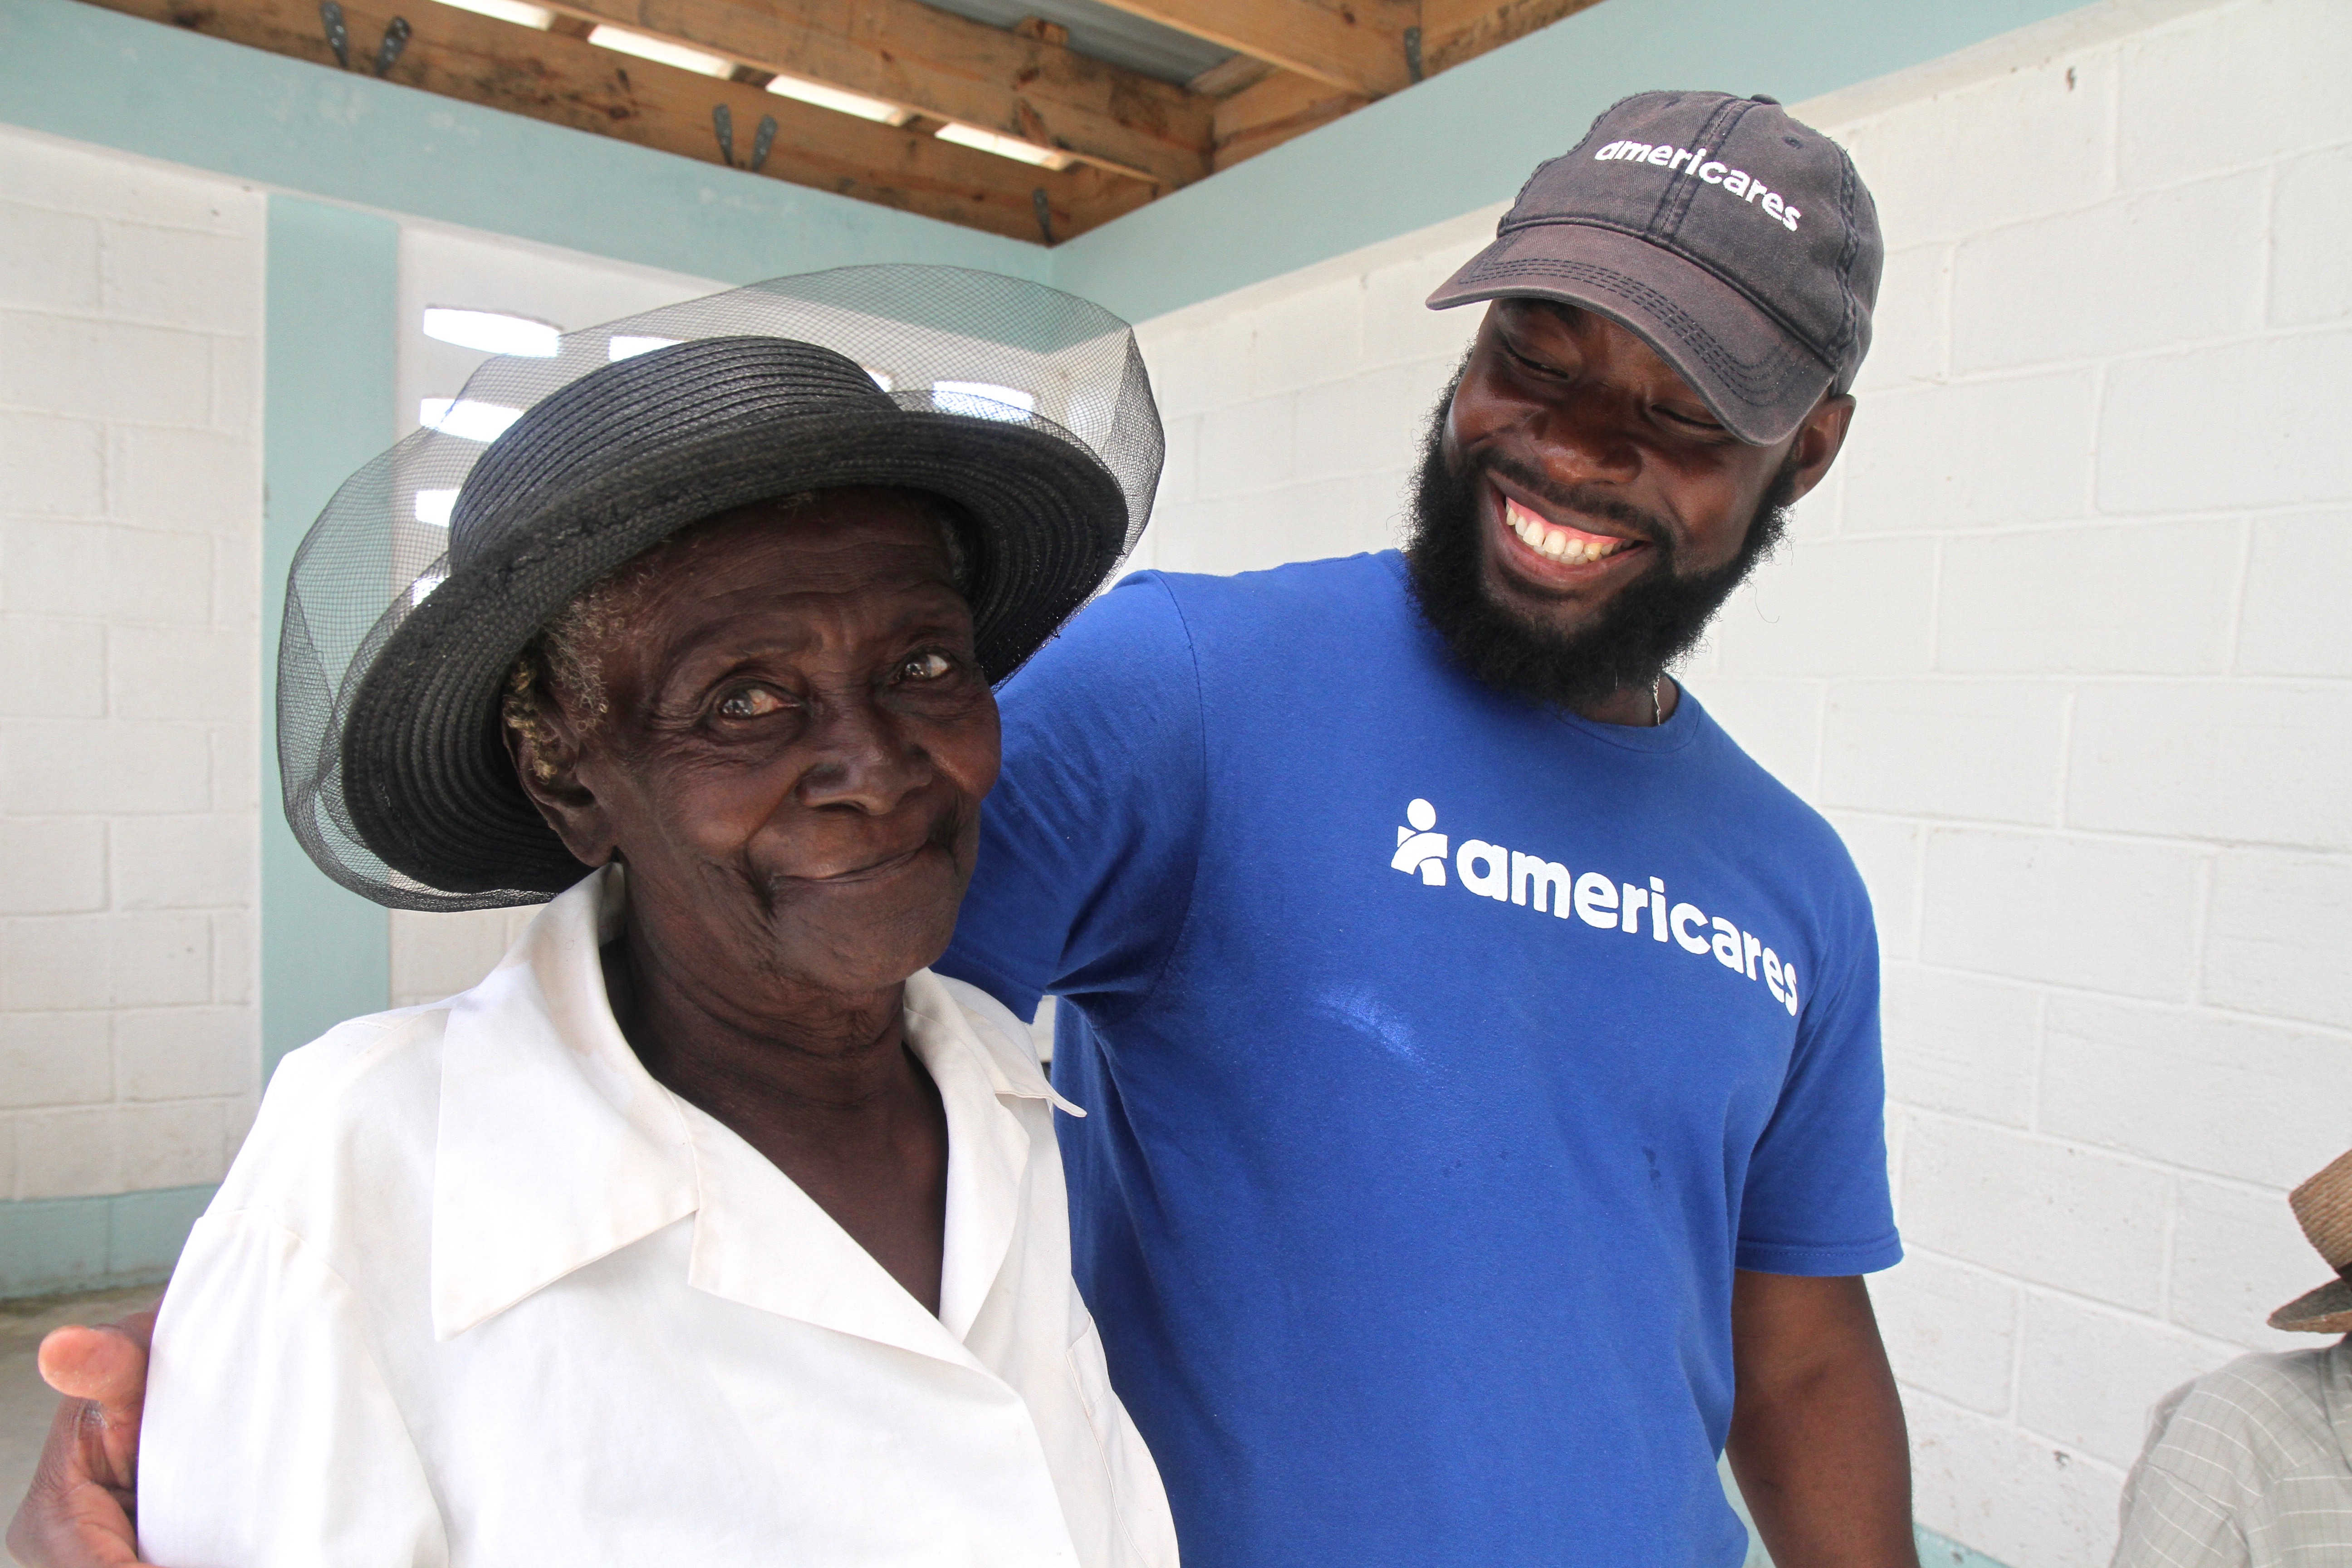 Americares: Providing Access to Health Care in the Aftermath of Hurricane Matthew